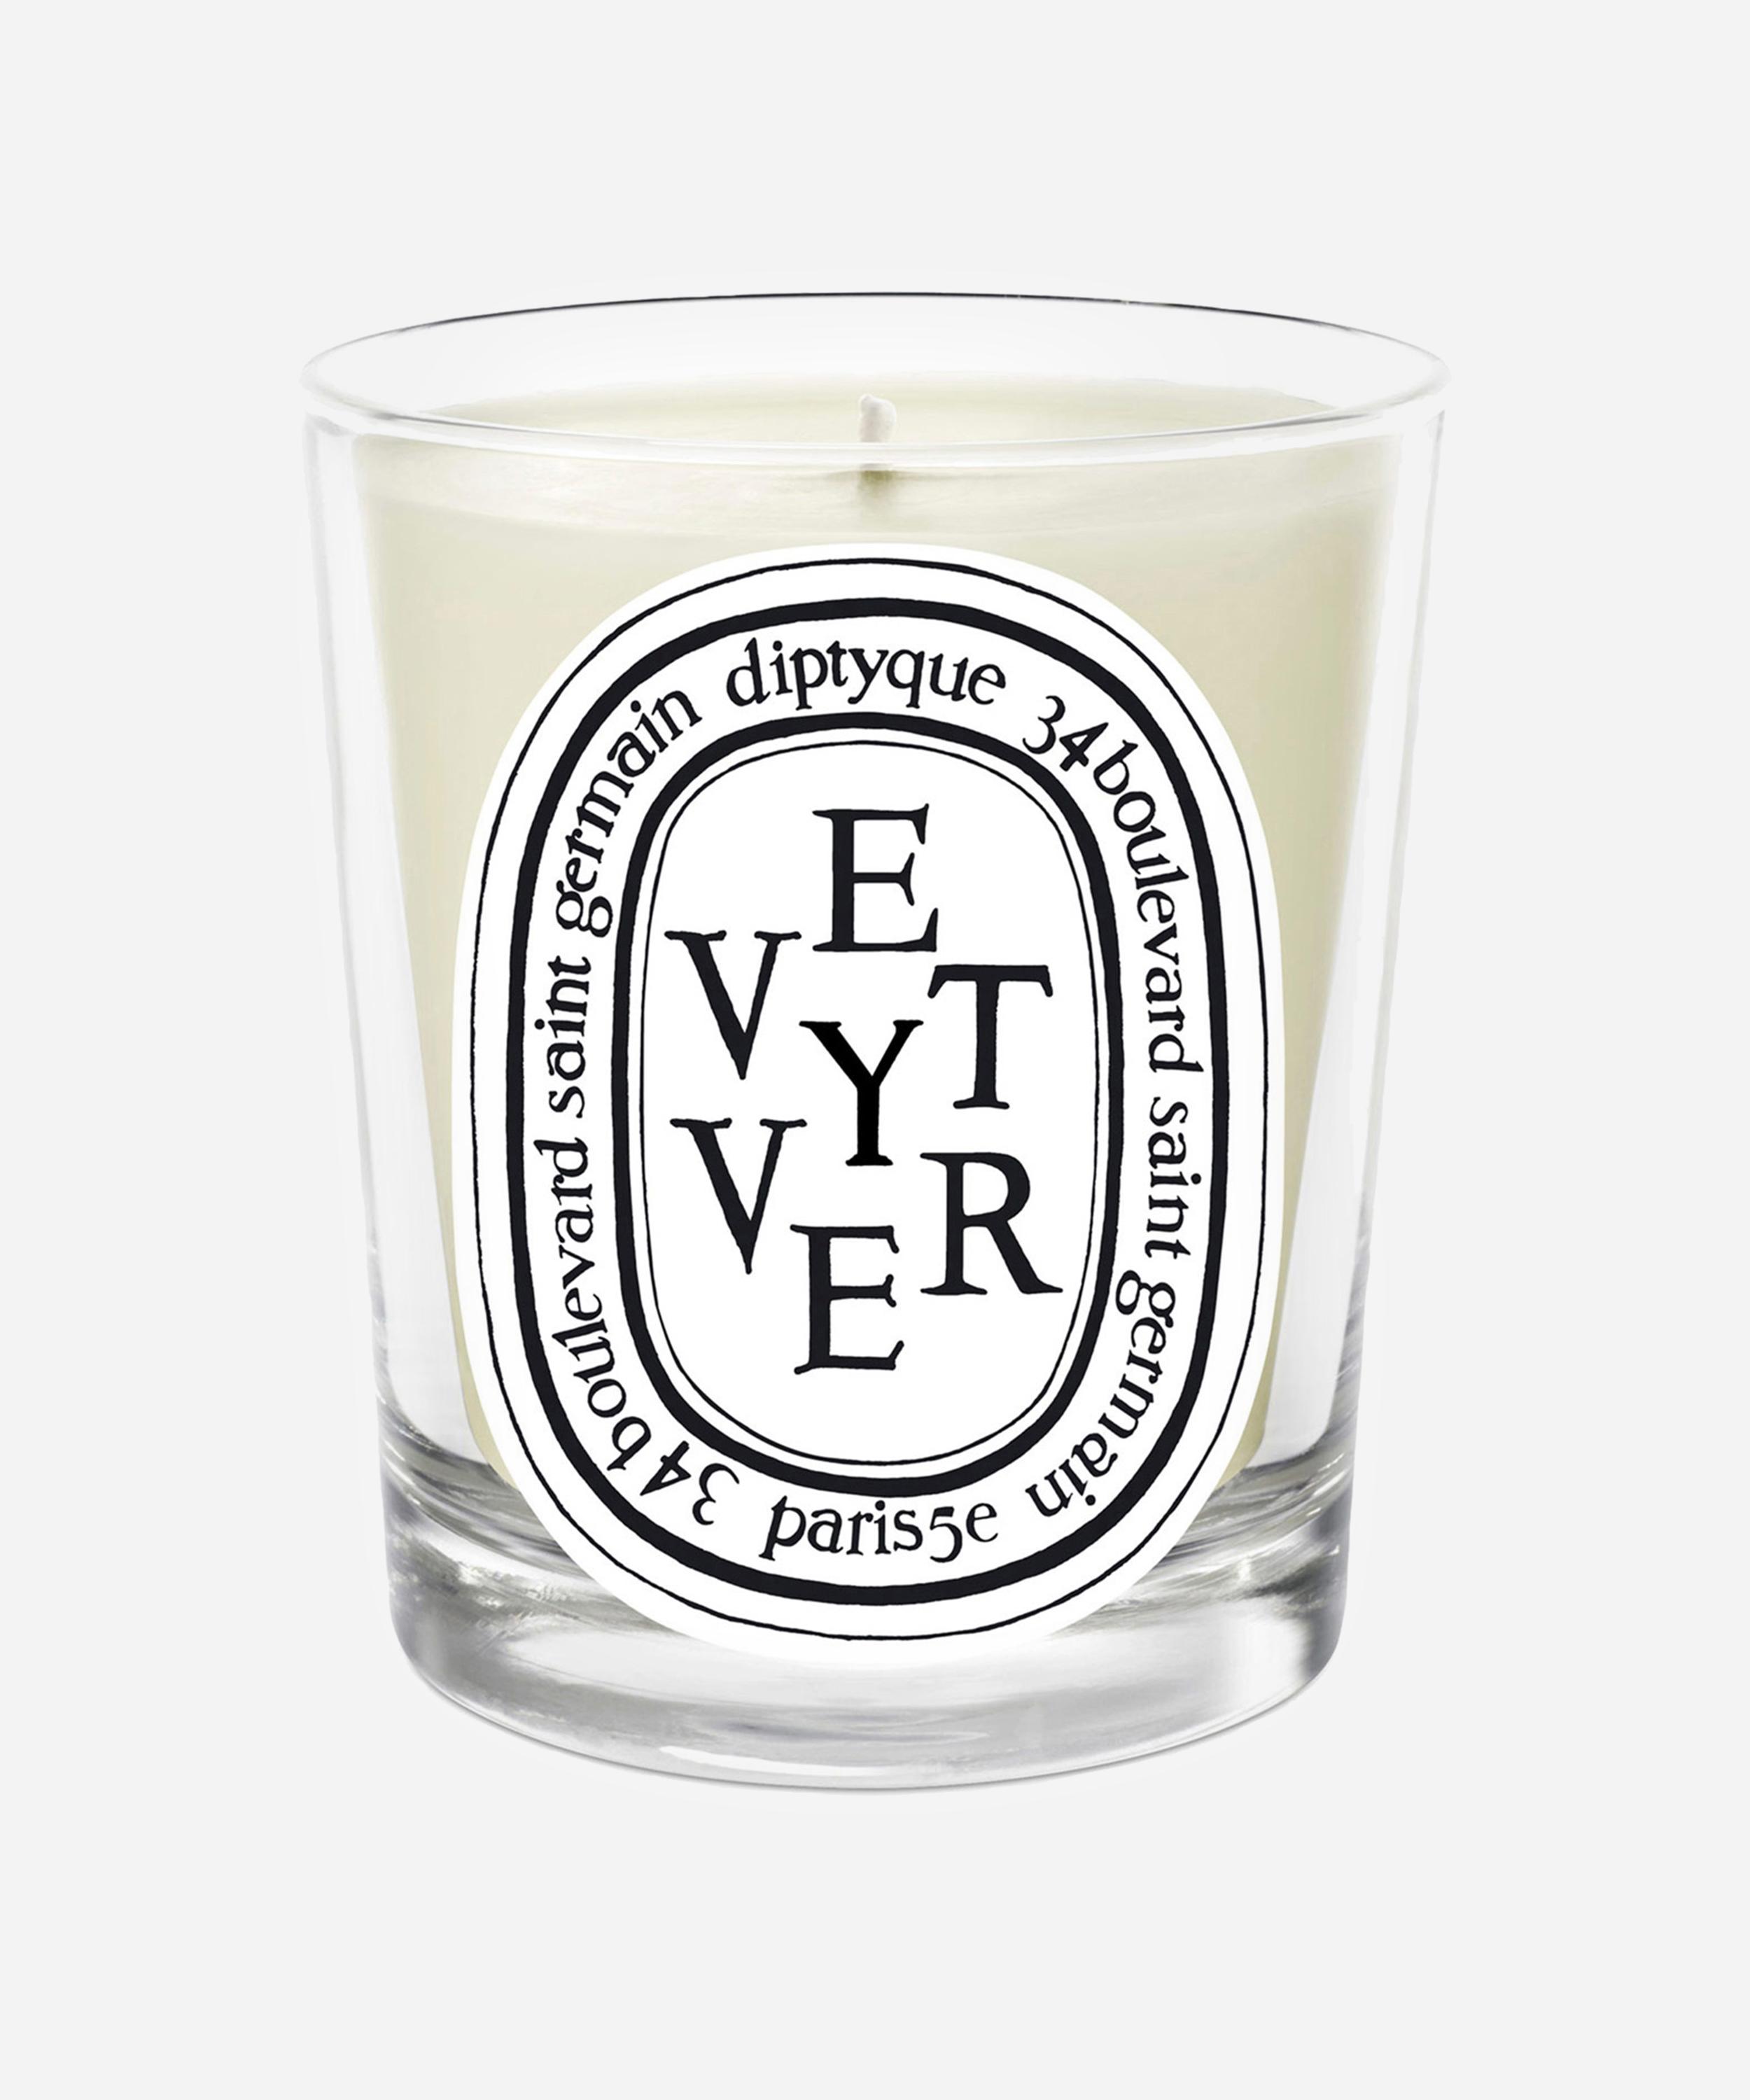 DIPTYQUE VETYVER SCENTED CANDLE 190G,321491